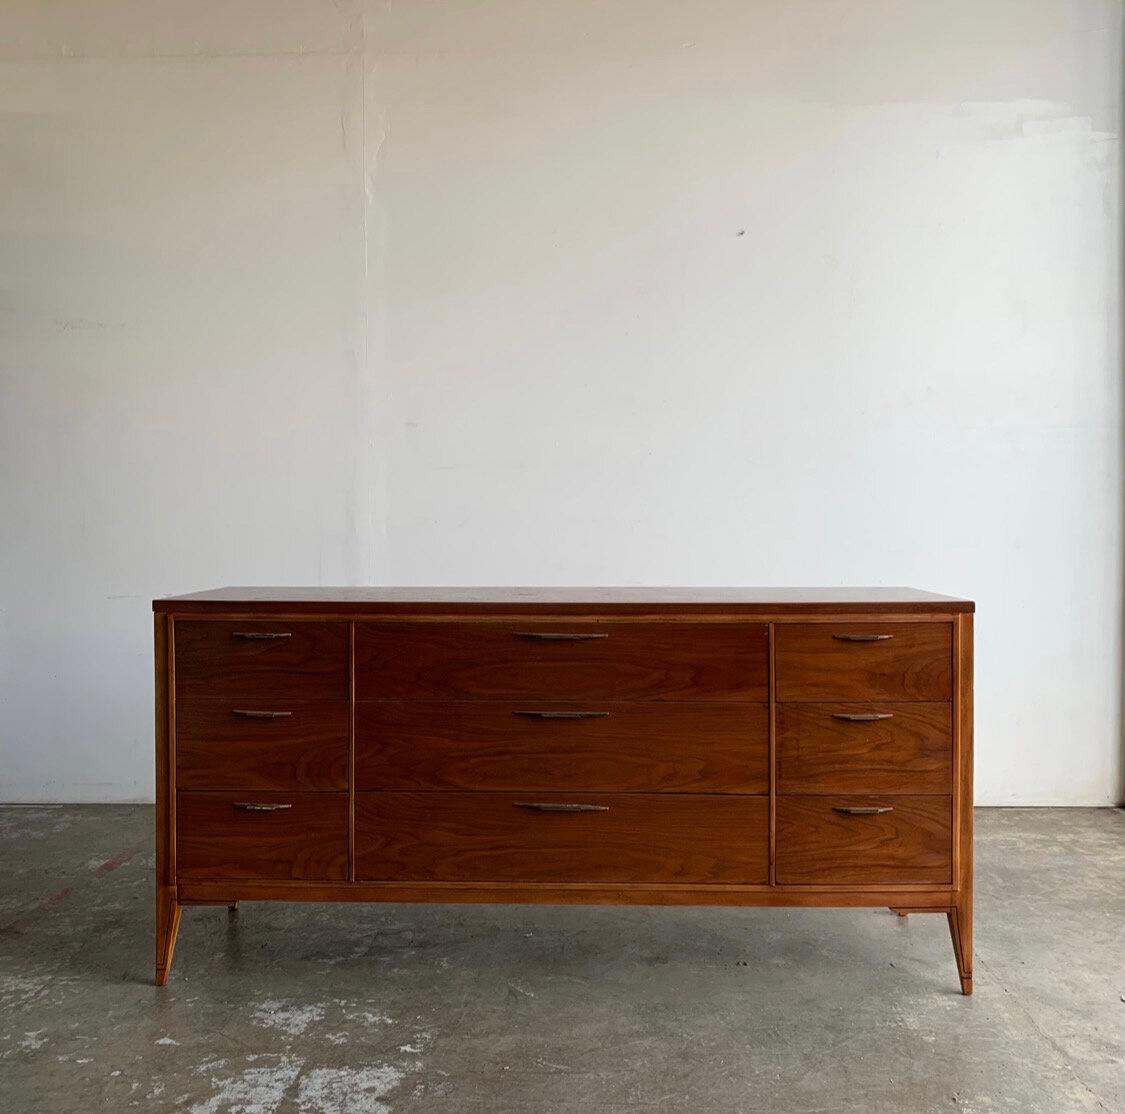 Mid century dresser by Kent Coffey. Nine drawers full of storage provides ample storage space. Dresser sits on tapered legs and handles are original. Made of walnut wood for Kent Coffey’s Tempo collection as marked.